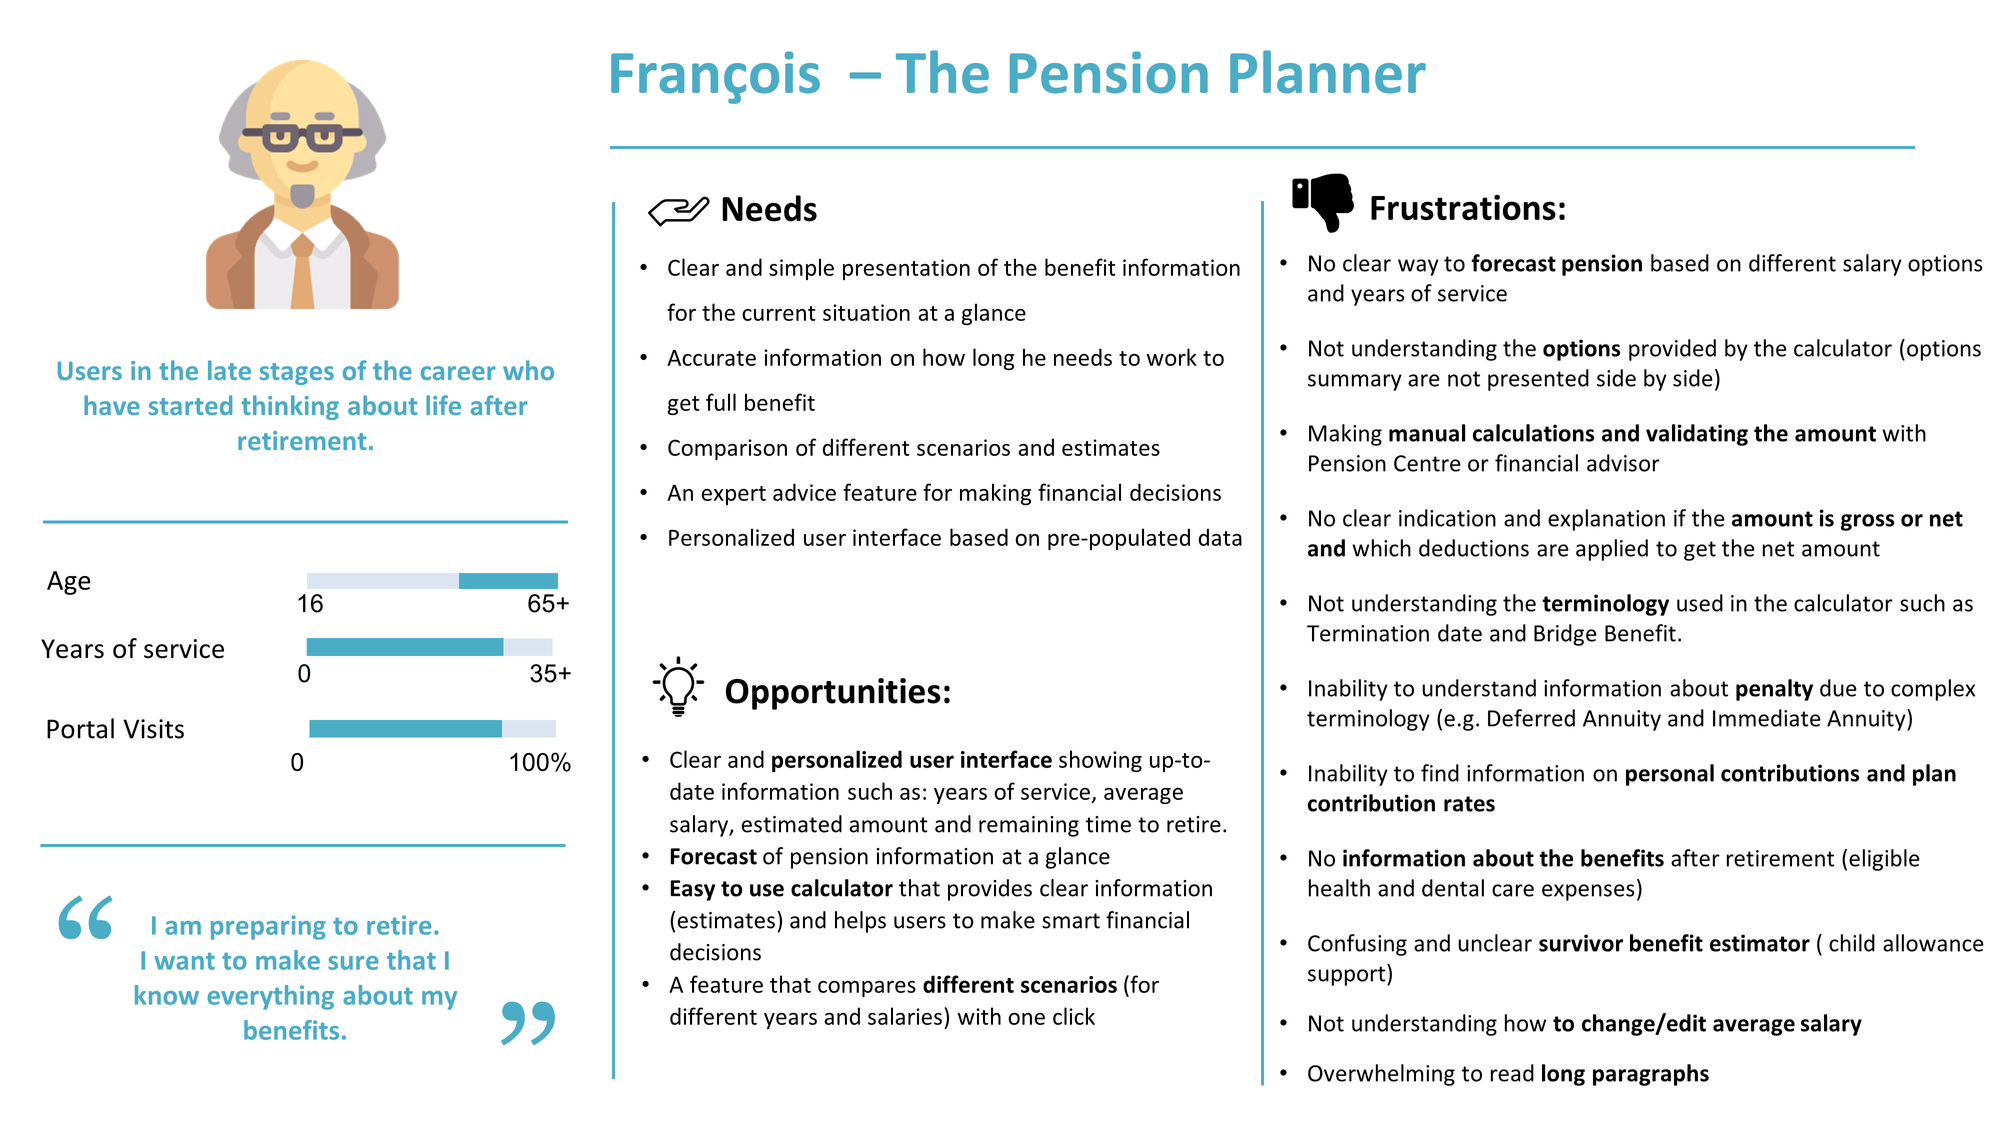 Long Description:  This is the persona profile for François, the Pension Planner. François is in the late stages of his career and has started thinking about life after retirement. •	François is nearing 50 years old. He has about 30 years of experience and has visited the pension portal about 80%. •	François states: “I am preparing to retire. I want to make sure that I know everything about my benefits”.  From the pension portal François needs: •	Clear and simple presentation of the benefit information for his current situation at a glance. •	Accurate information on how long he needs to work to get the full benefit. •	Comparison of the different scenarios and estimates. •	An expert advice feature for making financial decisions. •	Personalized user interface based on pre-populated data.  François is having these frustrations with the current pension portfolio: •	No way to forecast pension based on different salary options and years of service. •	Not understanding the options provided by the calculator (options summary are not presented side by side). •	Making manual calculations and validating the amount with the Pension Centre or financial advisor. •	No clear indication and explanation if the amount is gross or net and which deductions are applied to get the net amount. •	Not understanding the terminology used in the calculator such as Termination Date and Bridge Benefit. •	Inability to understand information about penalty due to complex terminology (e.g. Deferred Annuity and Immediate Annuity). •	Inability to find information on personal contributions and plan contribution rates. •	No information about the benefits after retirement (eligible health and dental care expenses). •	Confusing and unclear survivor benefit estimator (child allowance support). •	Not understanding how to change or edit average salary. •	Overwhelming to read long paragraphs.  Opportunities for improving the pension portal to meet François’ needs include: •	Clear and personalized user interface showing up-to-date information such as years of service, average salary, estimated amount and remaining time to retire. •	Forecast of pension information at a glance. •	Easy to use calculator that provides clear information (estimates) and helps users make smart financial decisions. •	A feature that compares different scenarios (for different years and salaries) with one click.